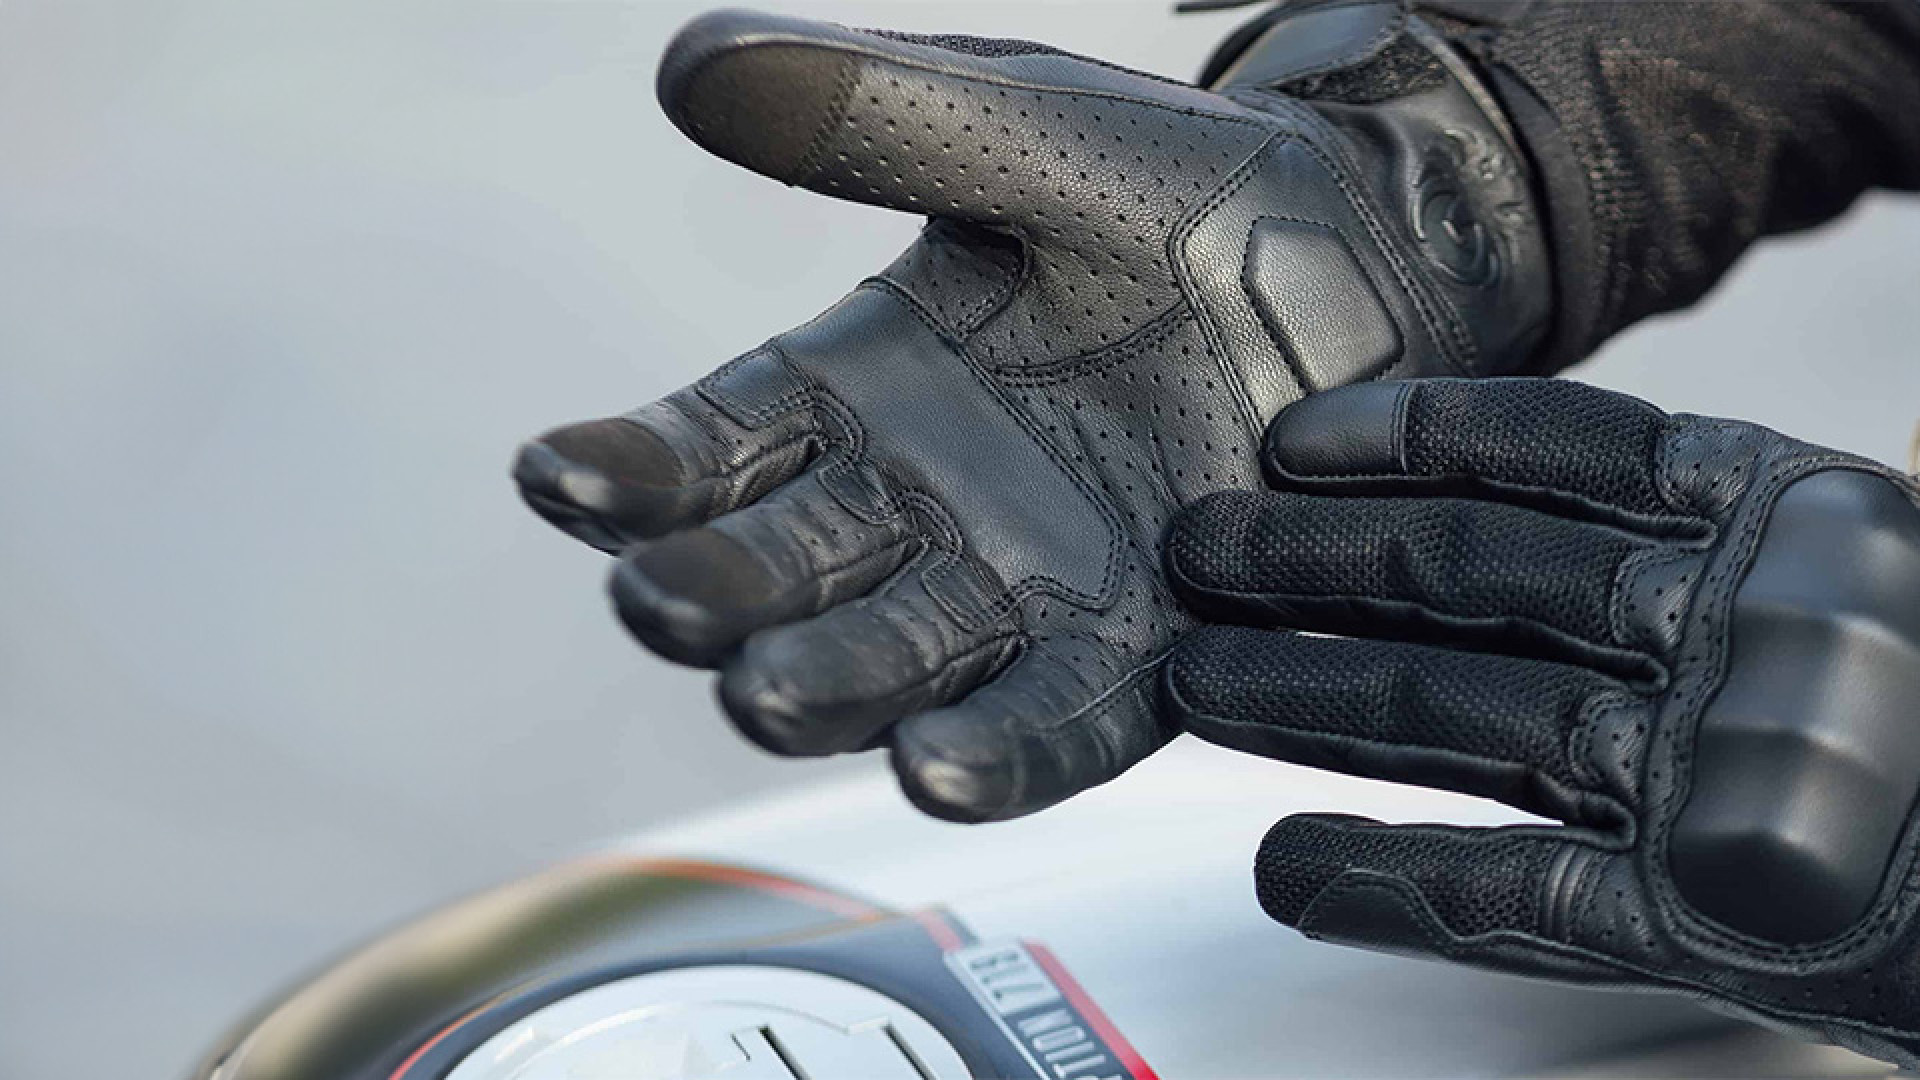 https://www.raceleathers.co.uk/image/cache/catalog/Blog%20Images/Should%20Motorcycle%20Gloves%20Be%20Tight%20or%20Loose-1920x1080.jpg